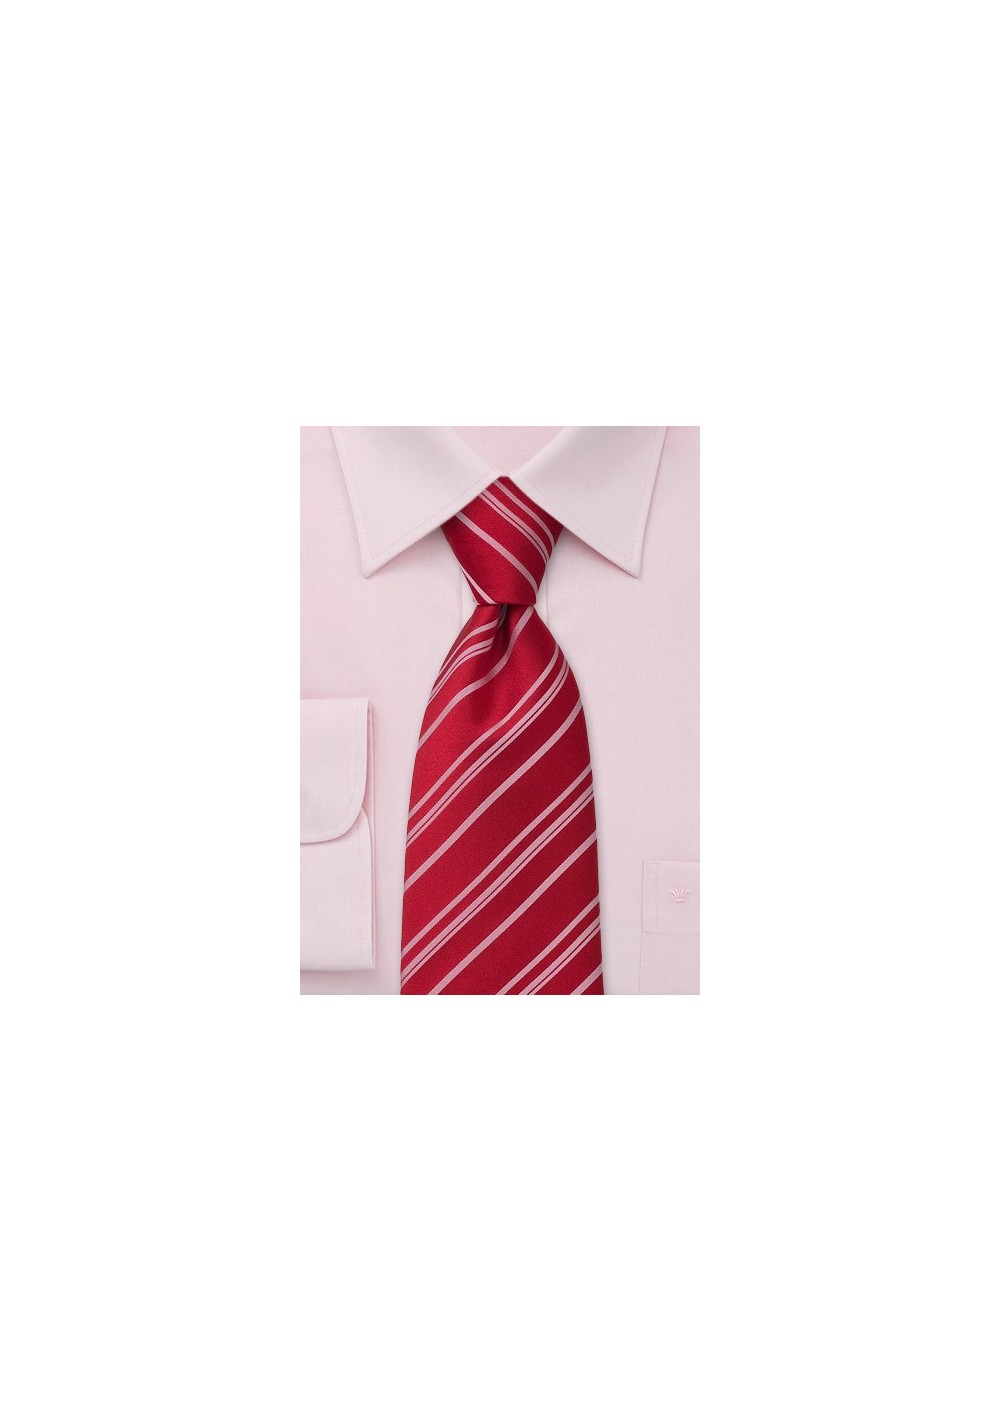 Striped Tie  -  Red Tie with light red stripes